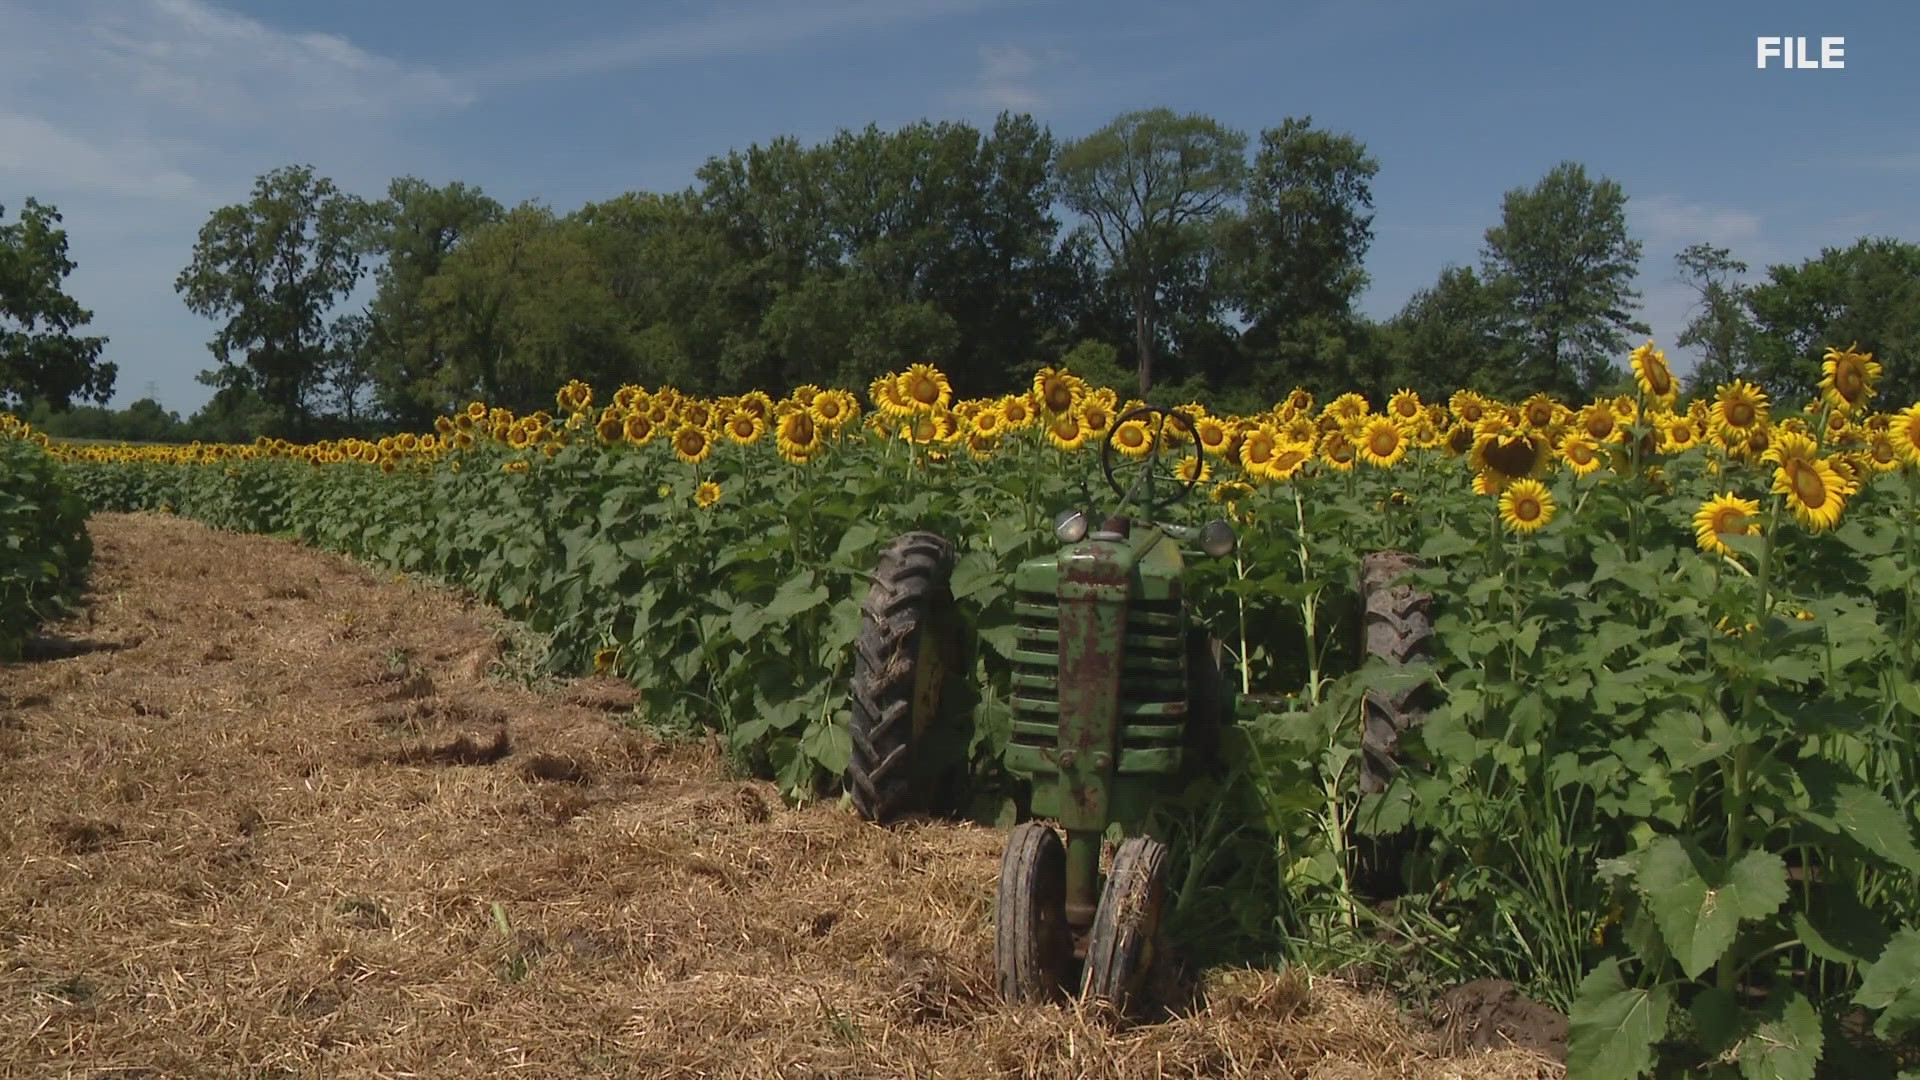 The sunflowers don't stick around for long. Eckert's expects the experience to last through July 30.